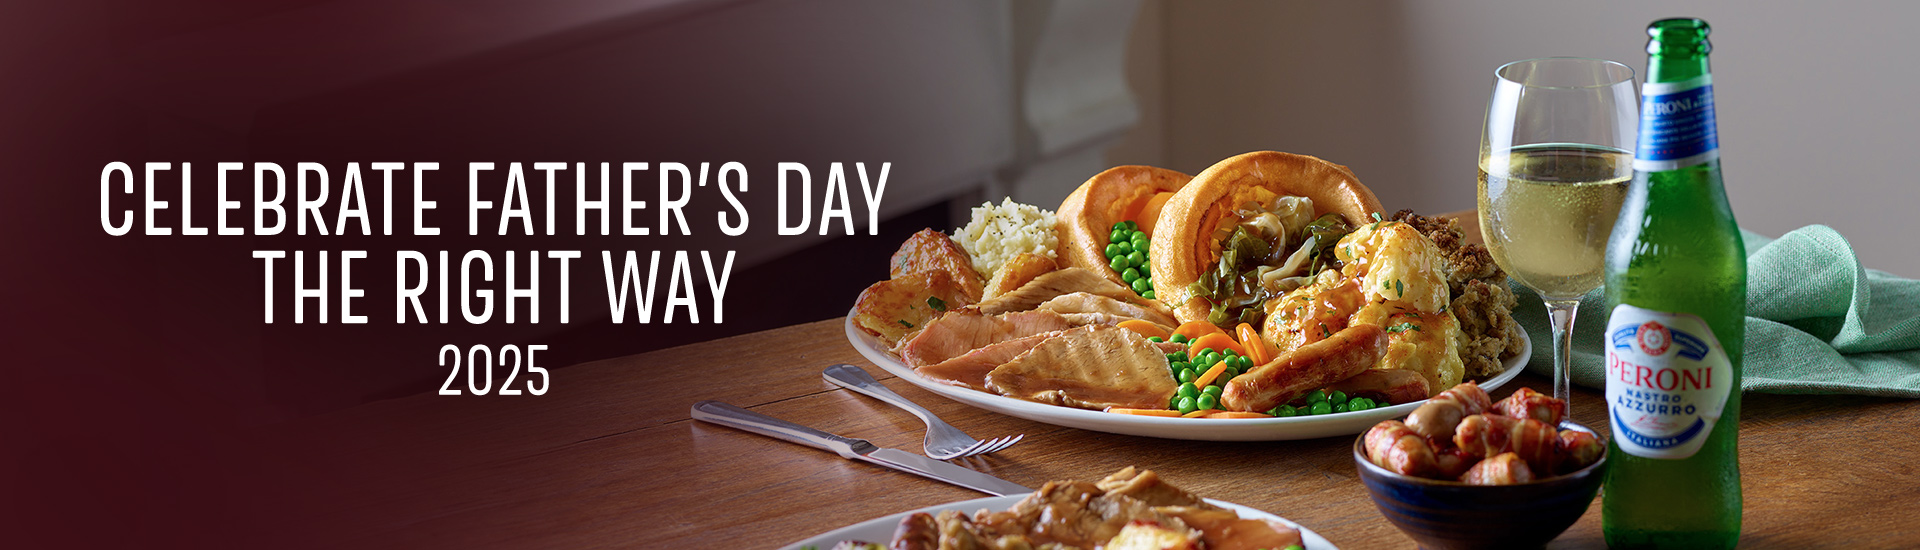 Father’s day carvery in Gateshead